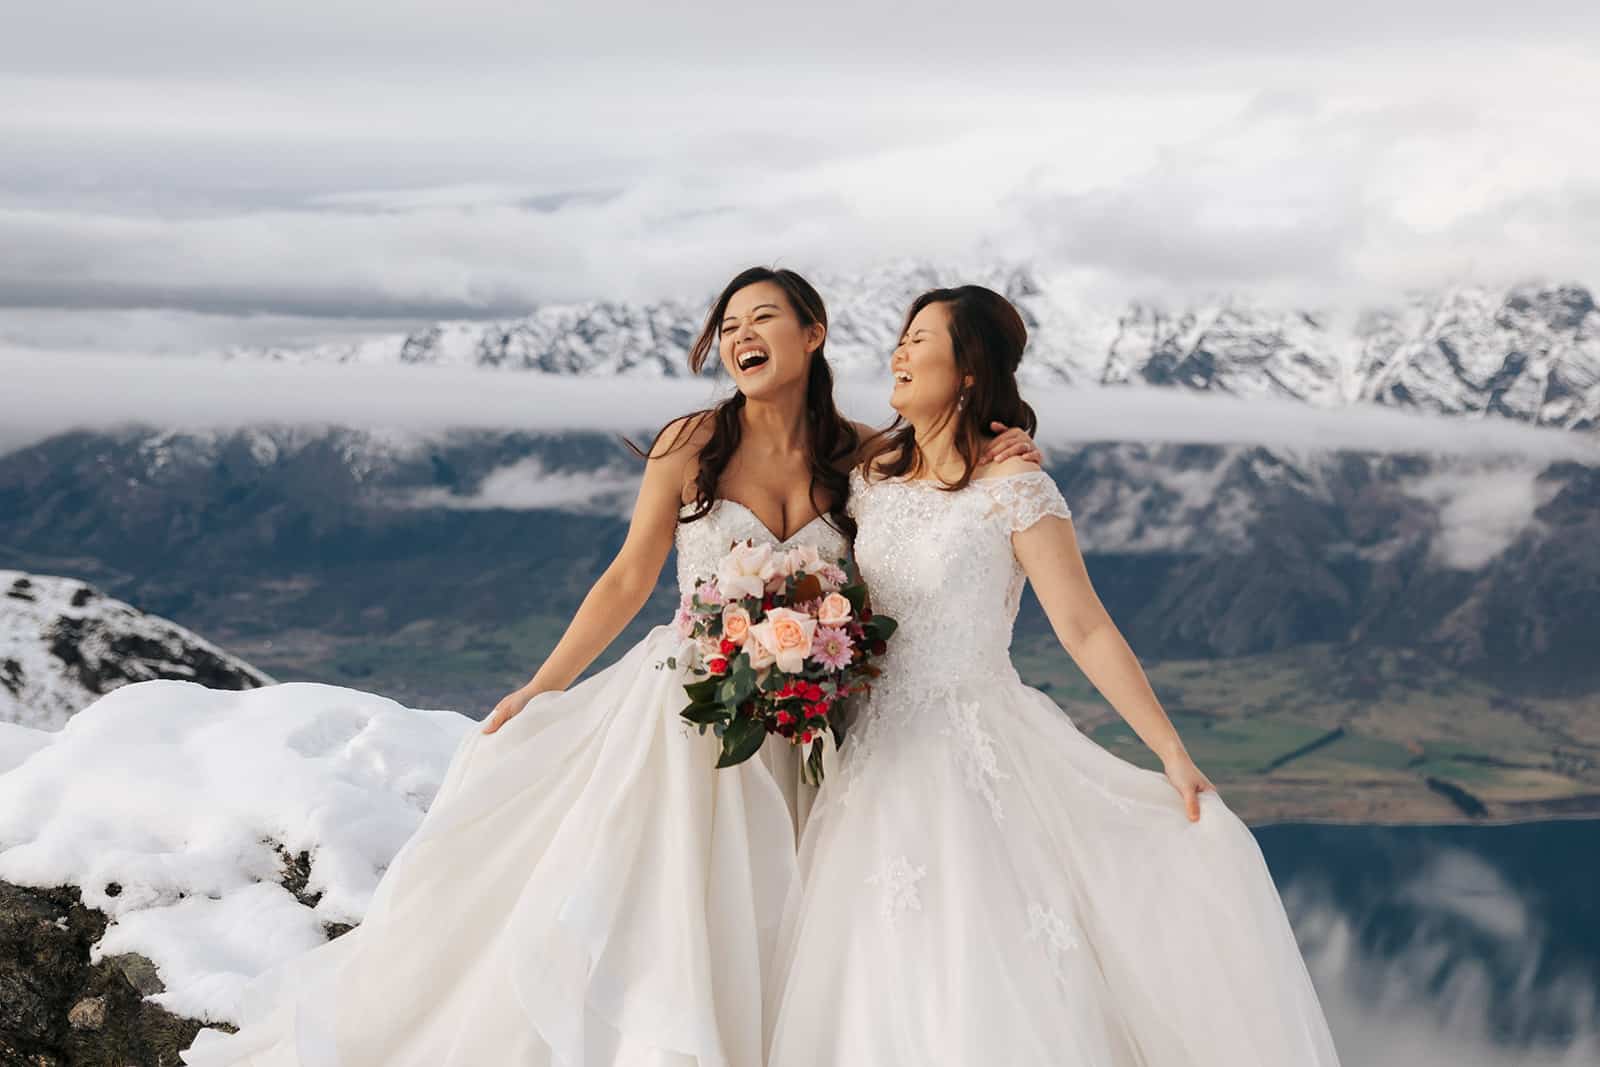 Winter heli wedding in Queenstown, Same sex Wedding with two brides in white dresses